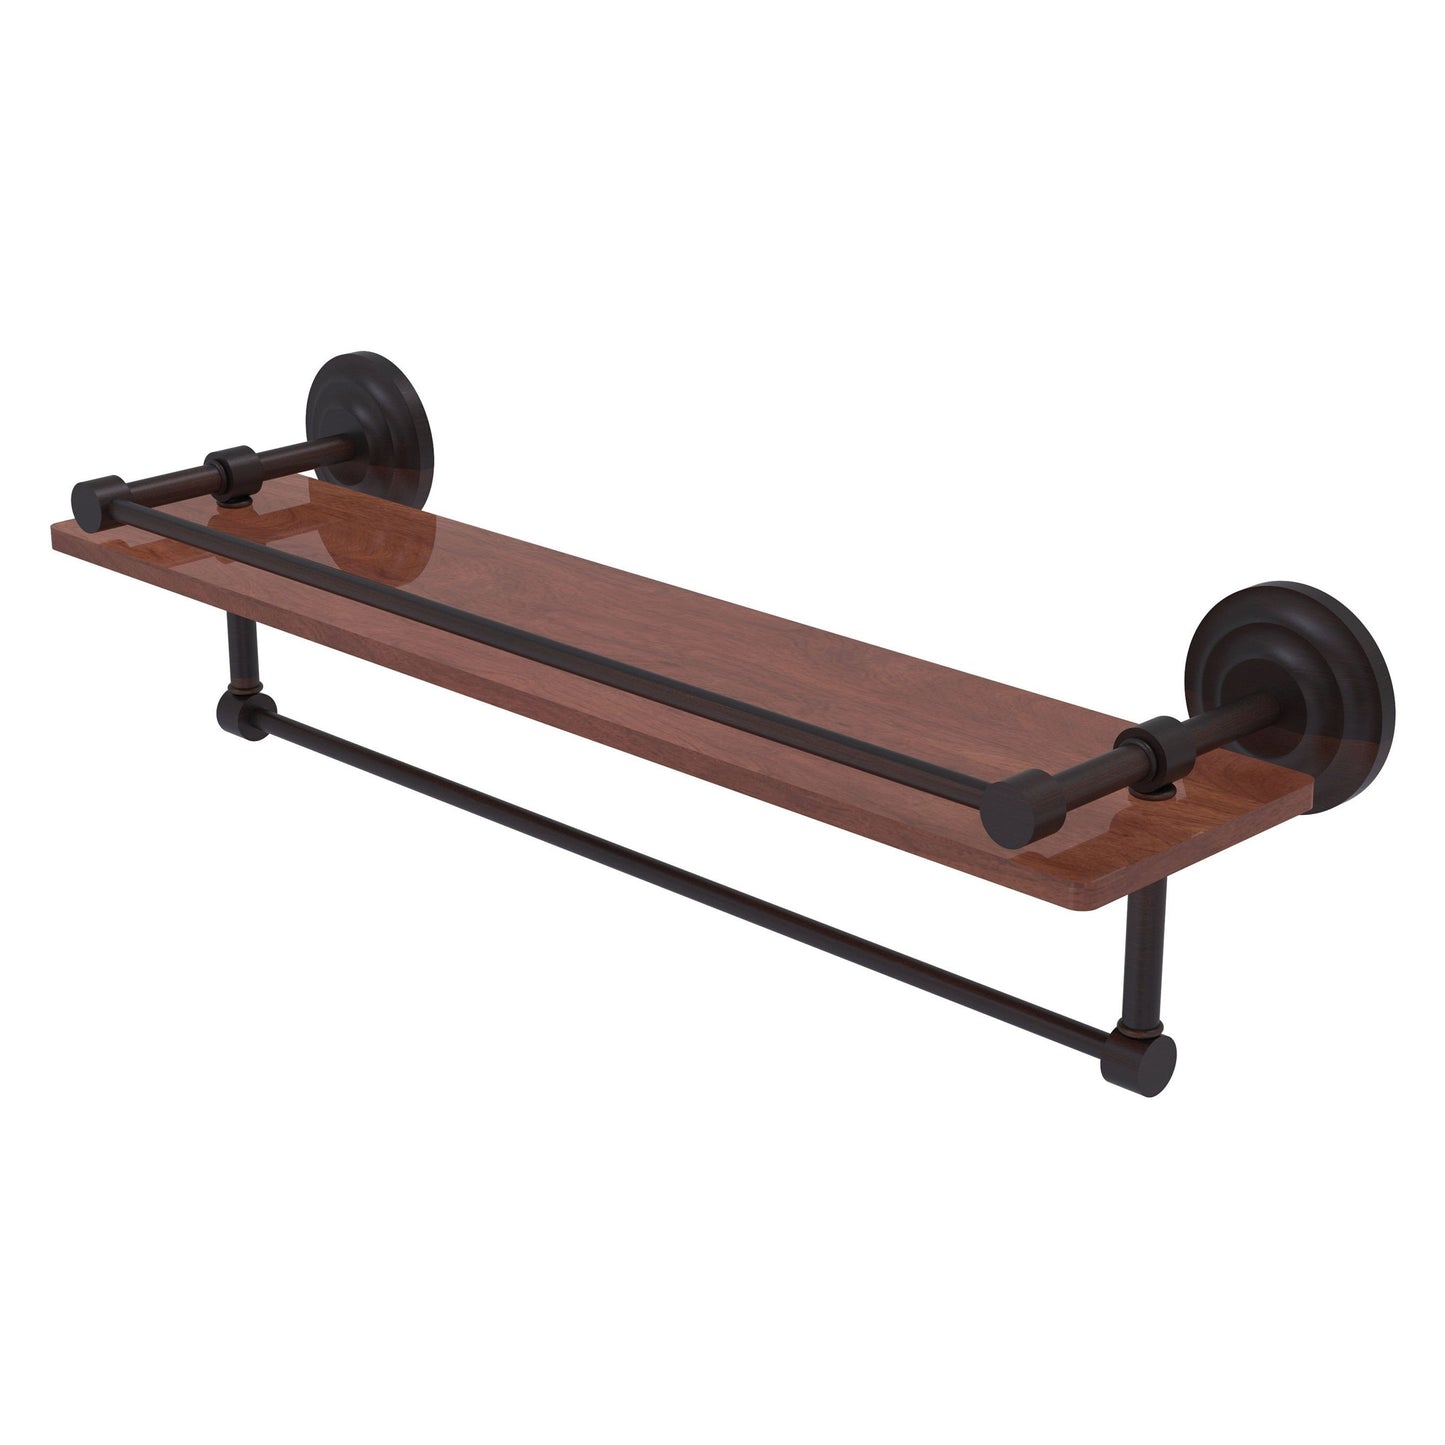 Allied Brass Que New 22" x 5" Venetian Bronze Solid Brass 22-Inch IPE Ironwood Shelf With Gallery Rail and Towel Bar